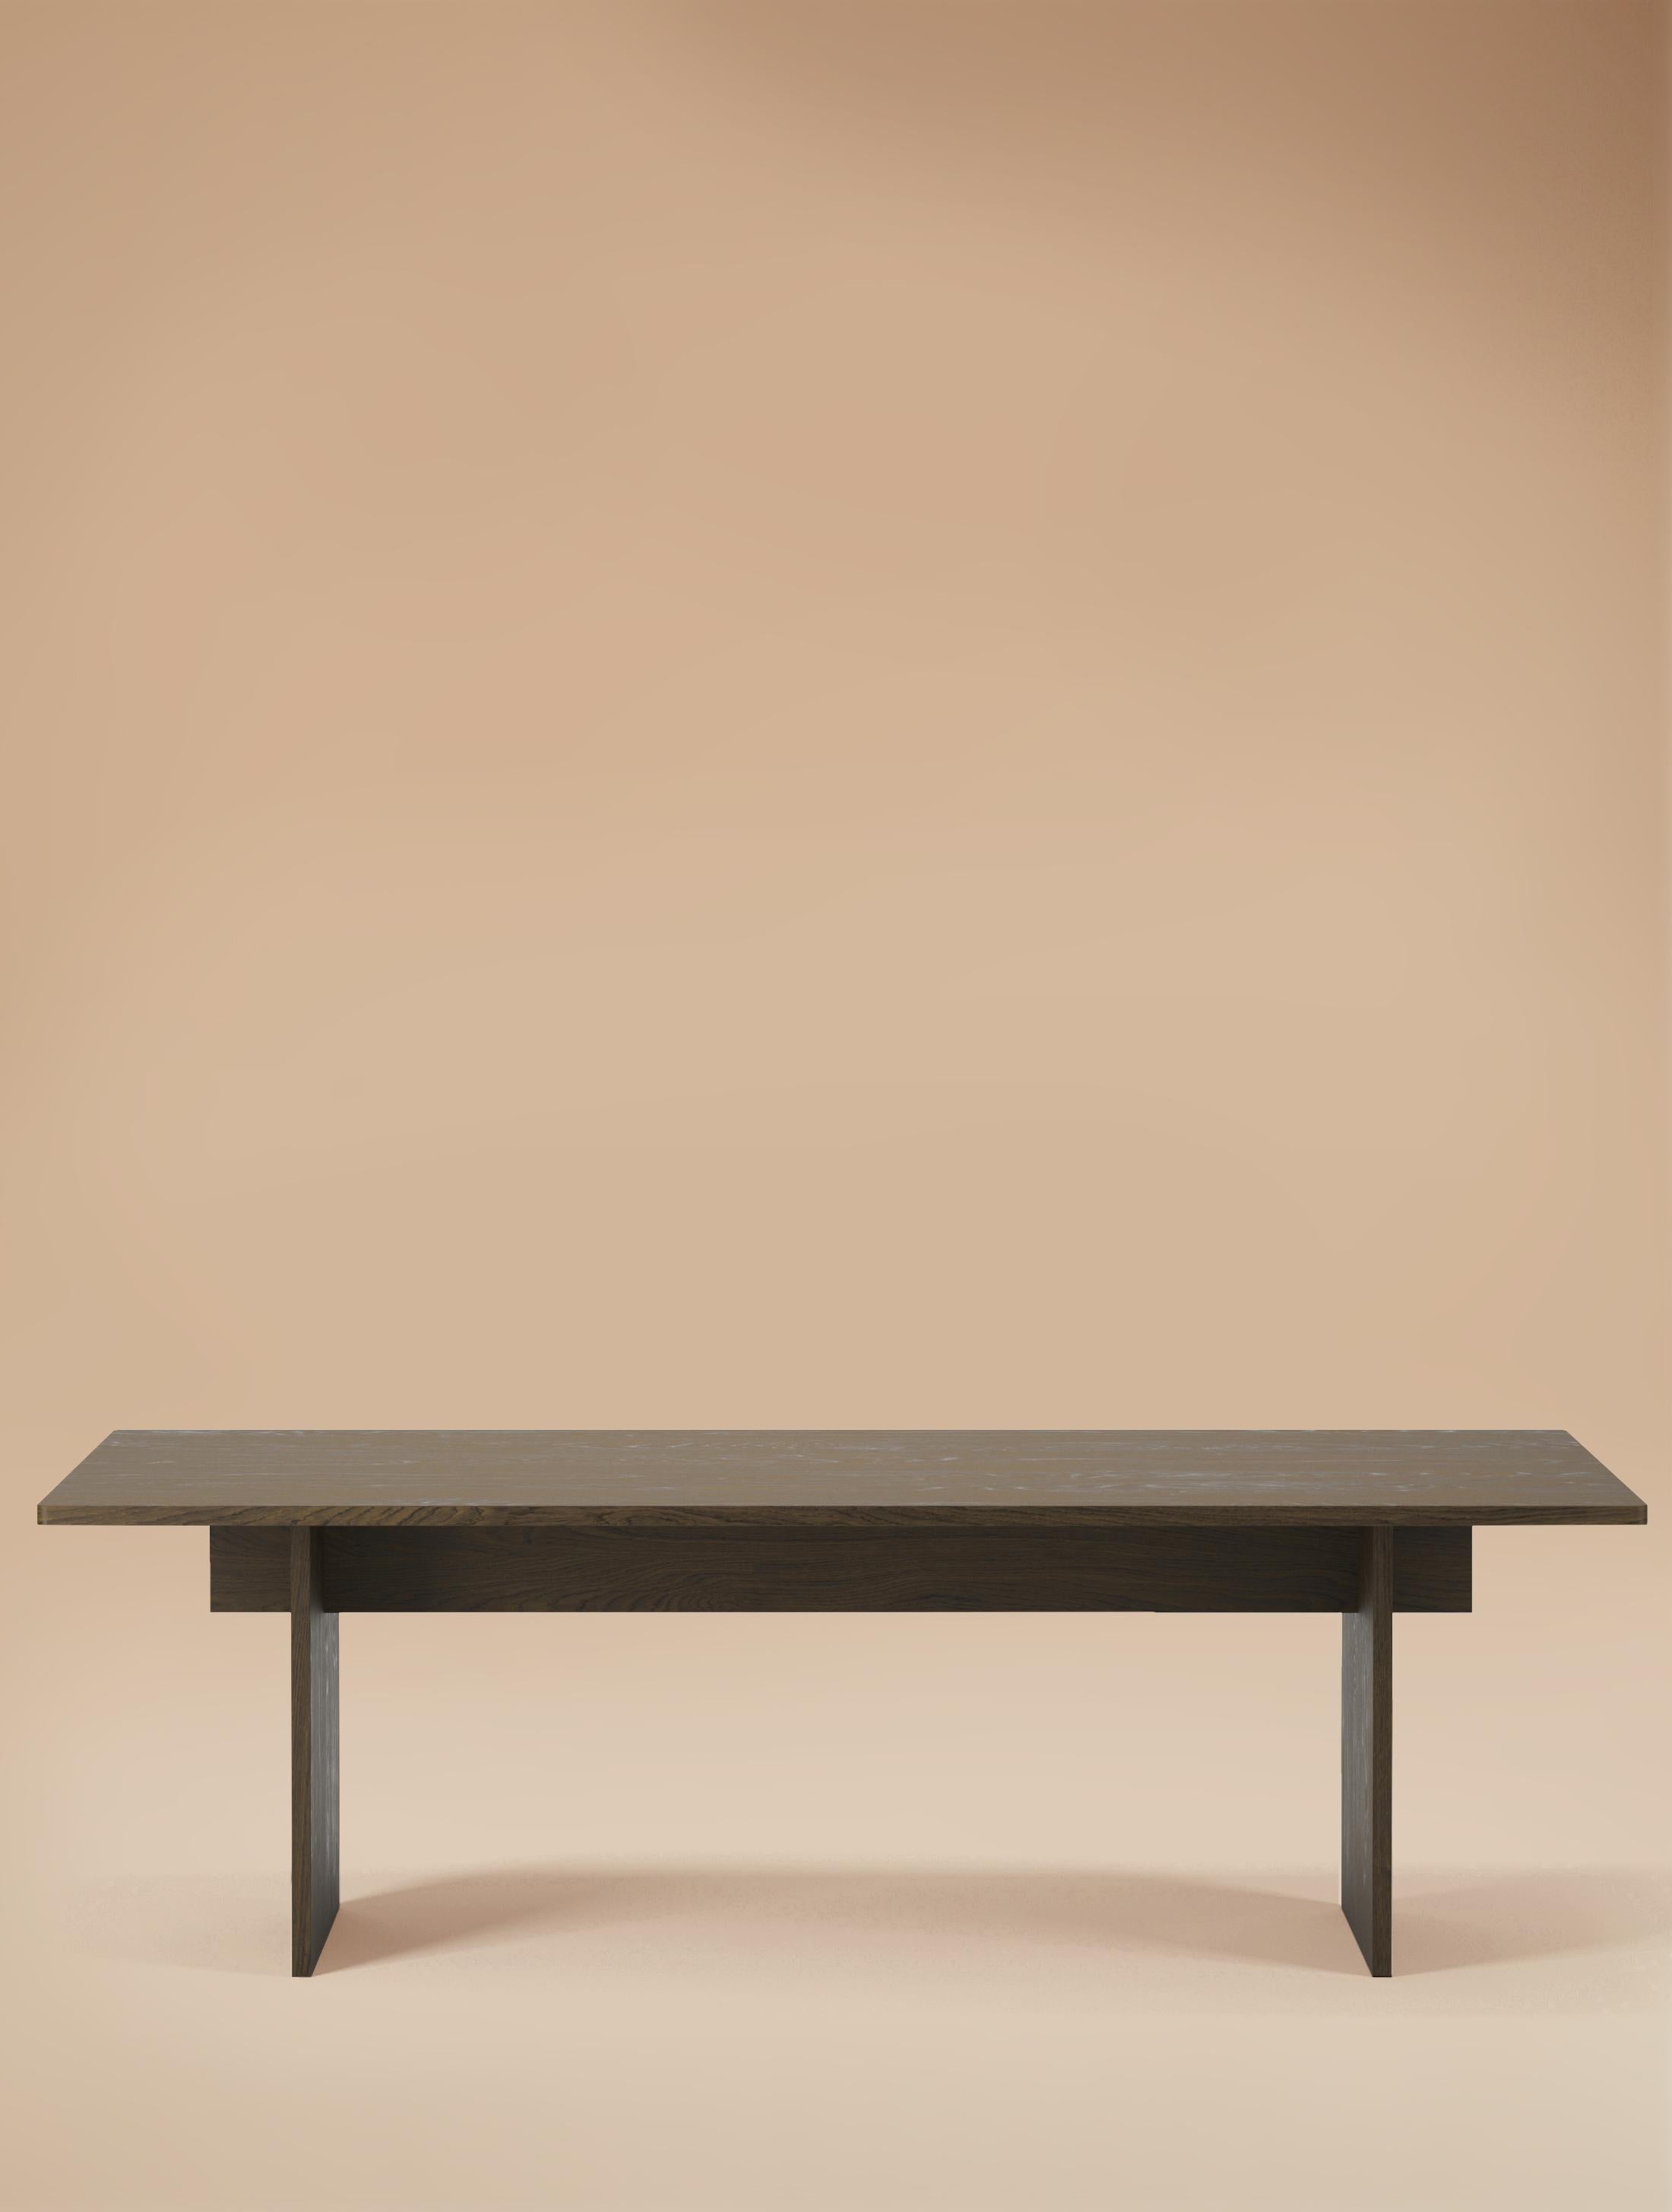 6 Seater Faure Table Handcrafted in Oak by Kevin Frankental 12